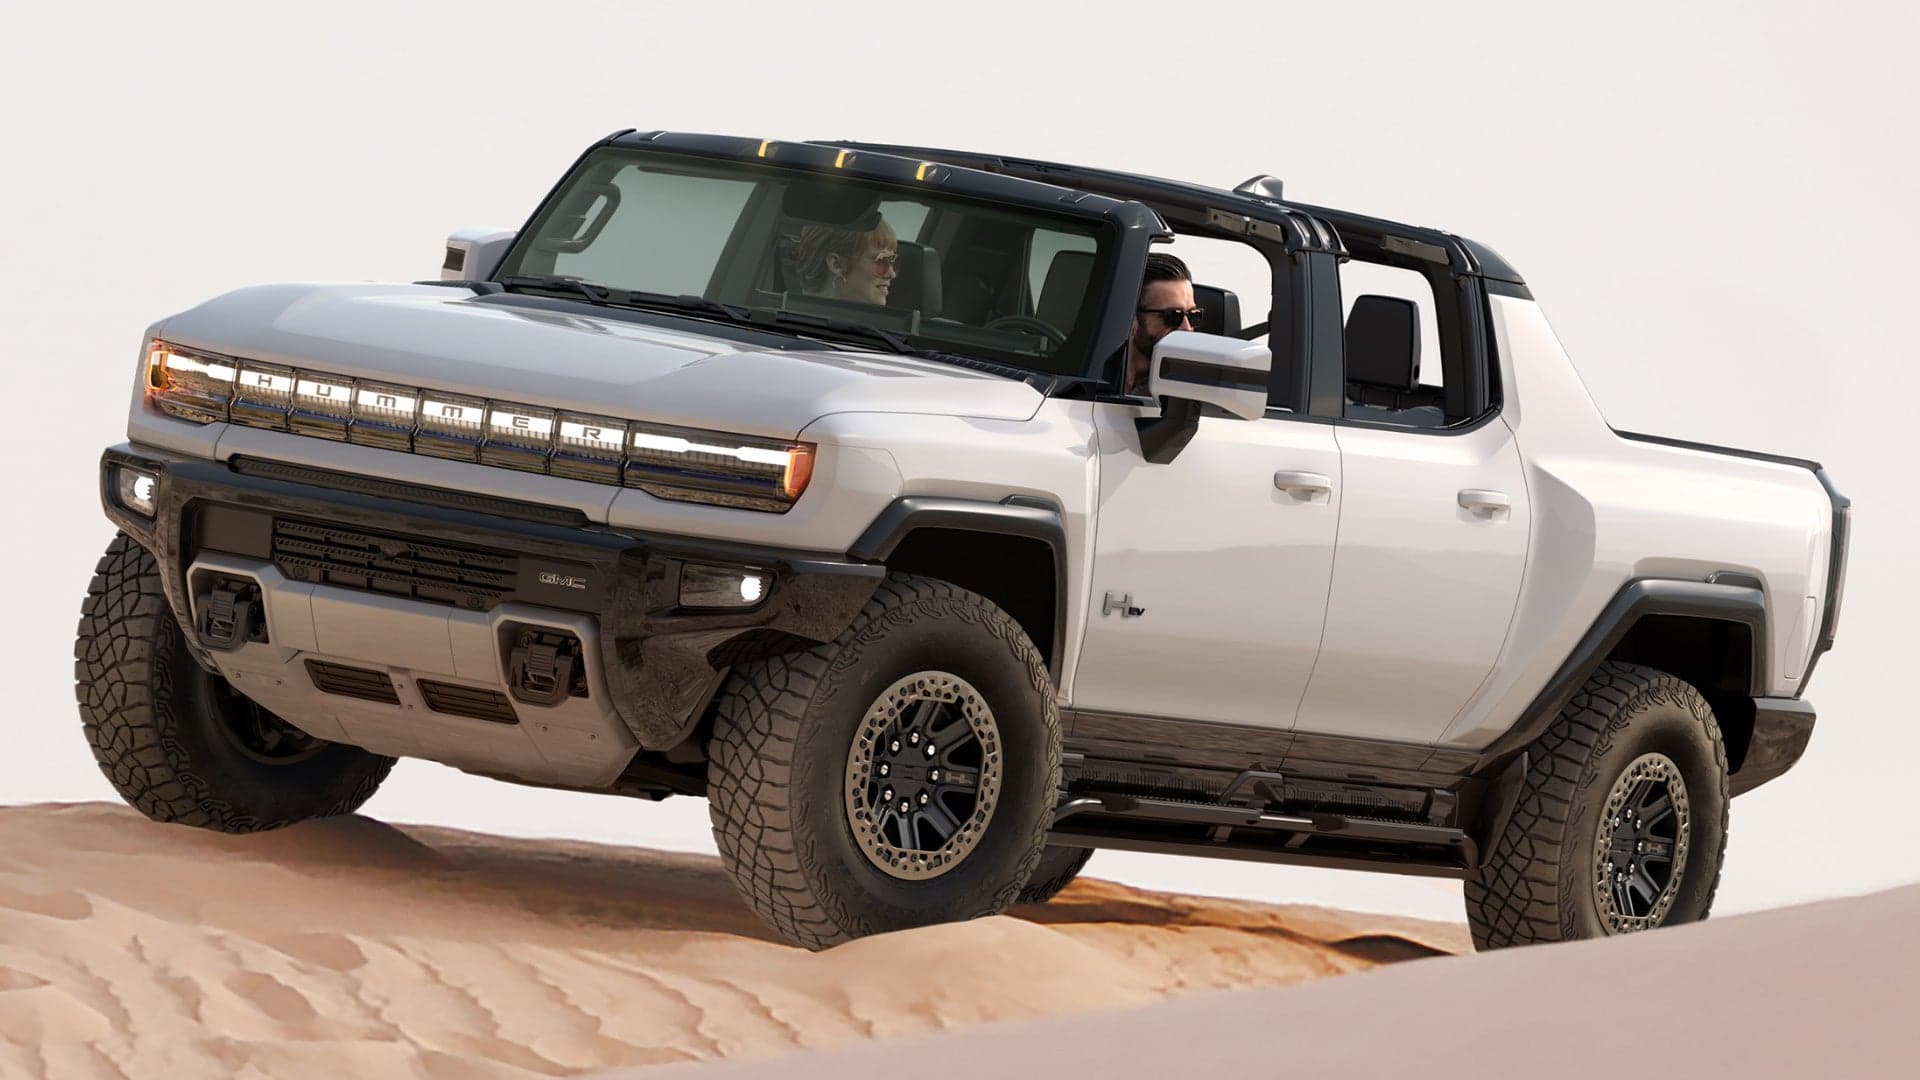 The GMC Hummer EV Pickup Will Weigh 9,046 Pounds: Report